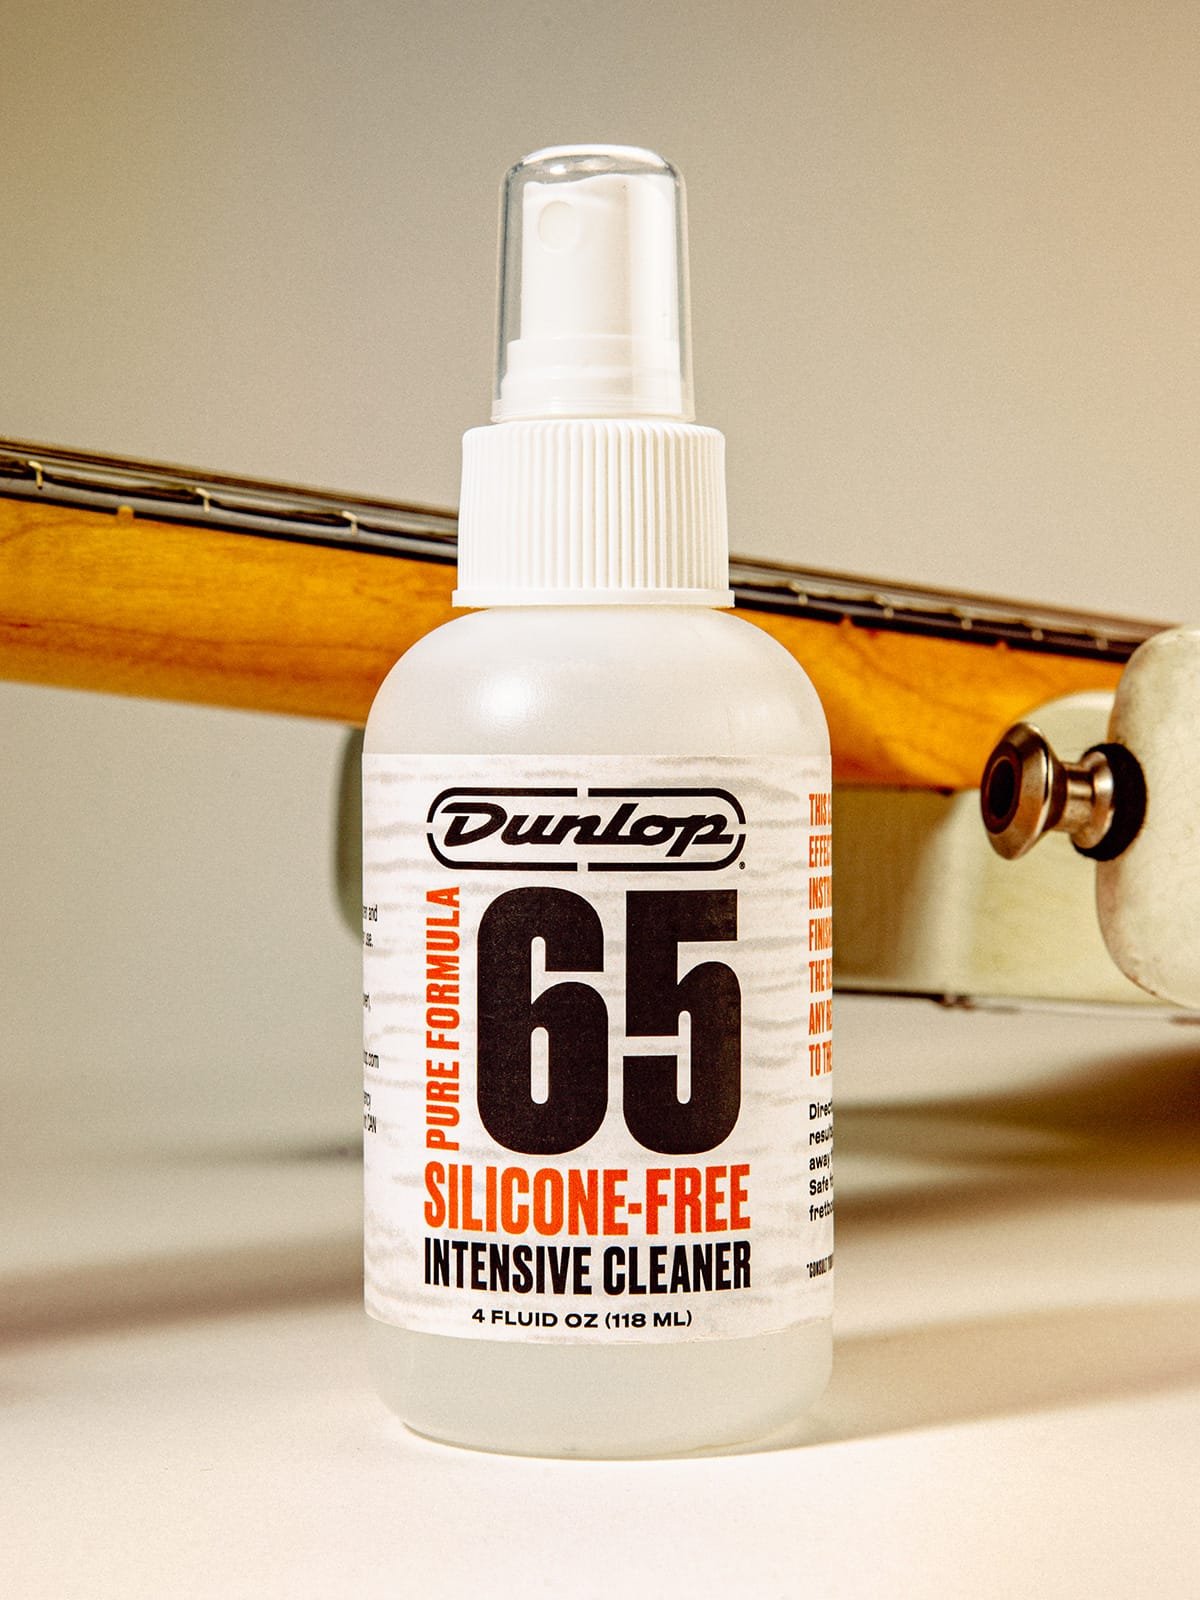 Take care of your guitar with the new Dunlop Pure Formula 65 Care